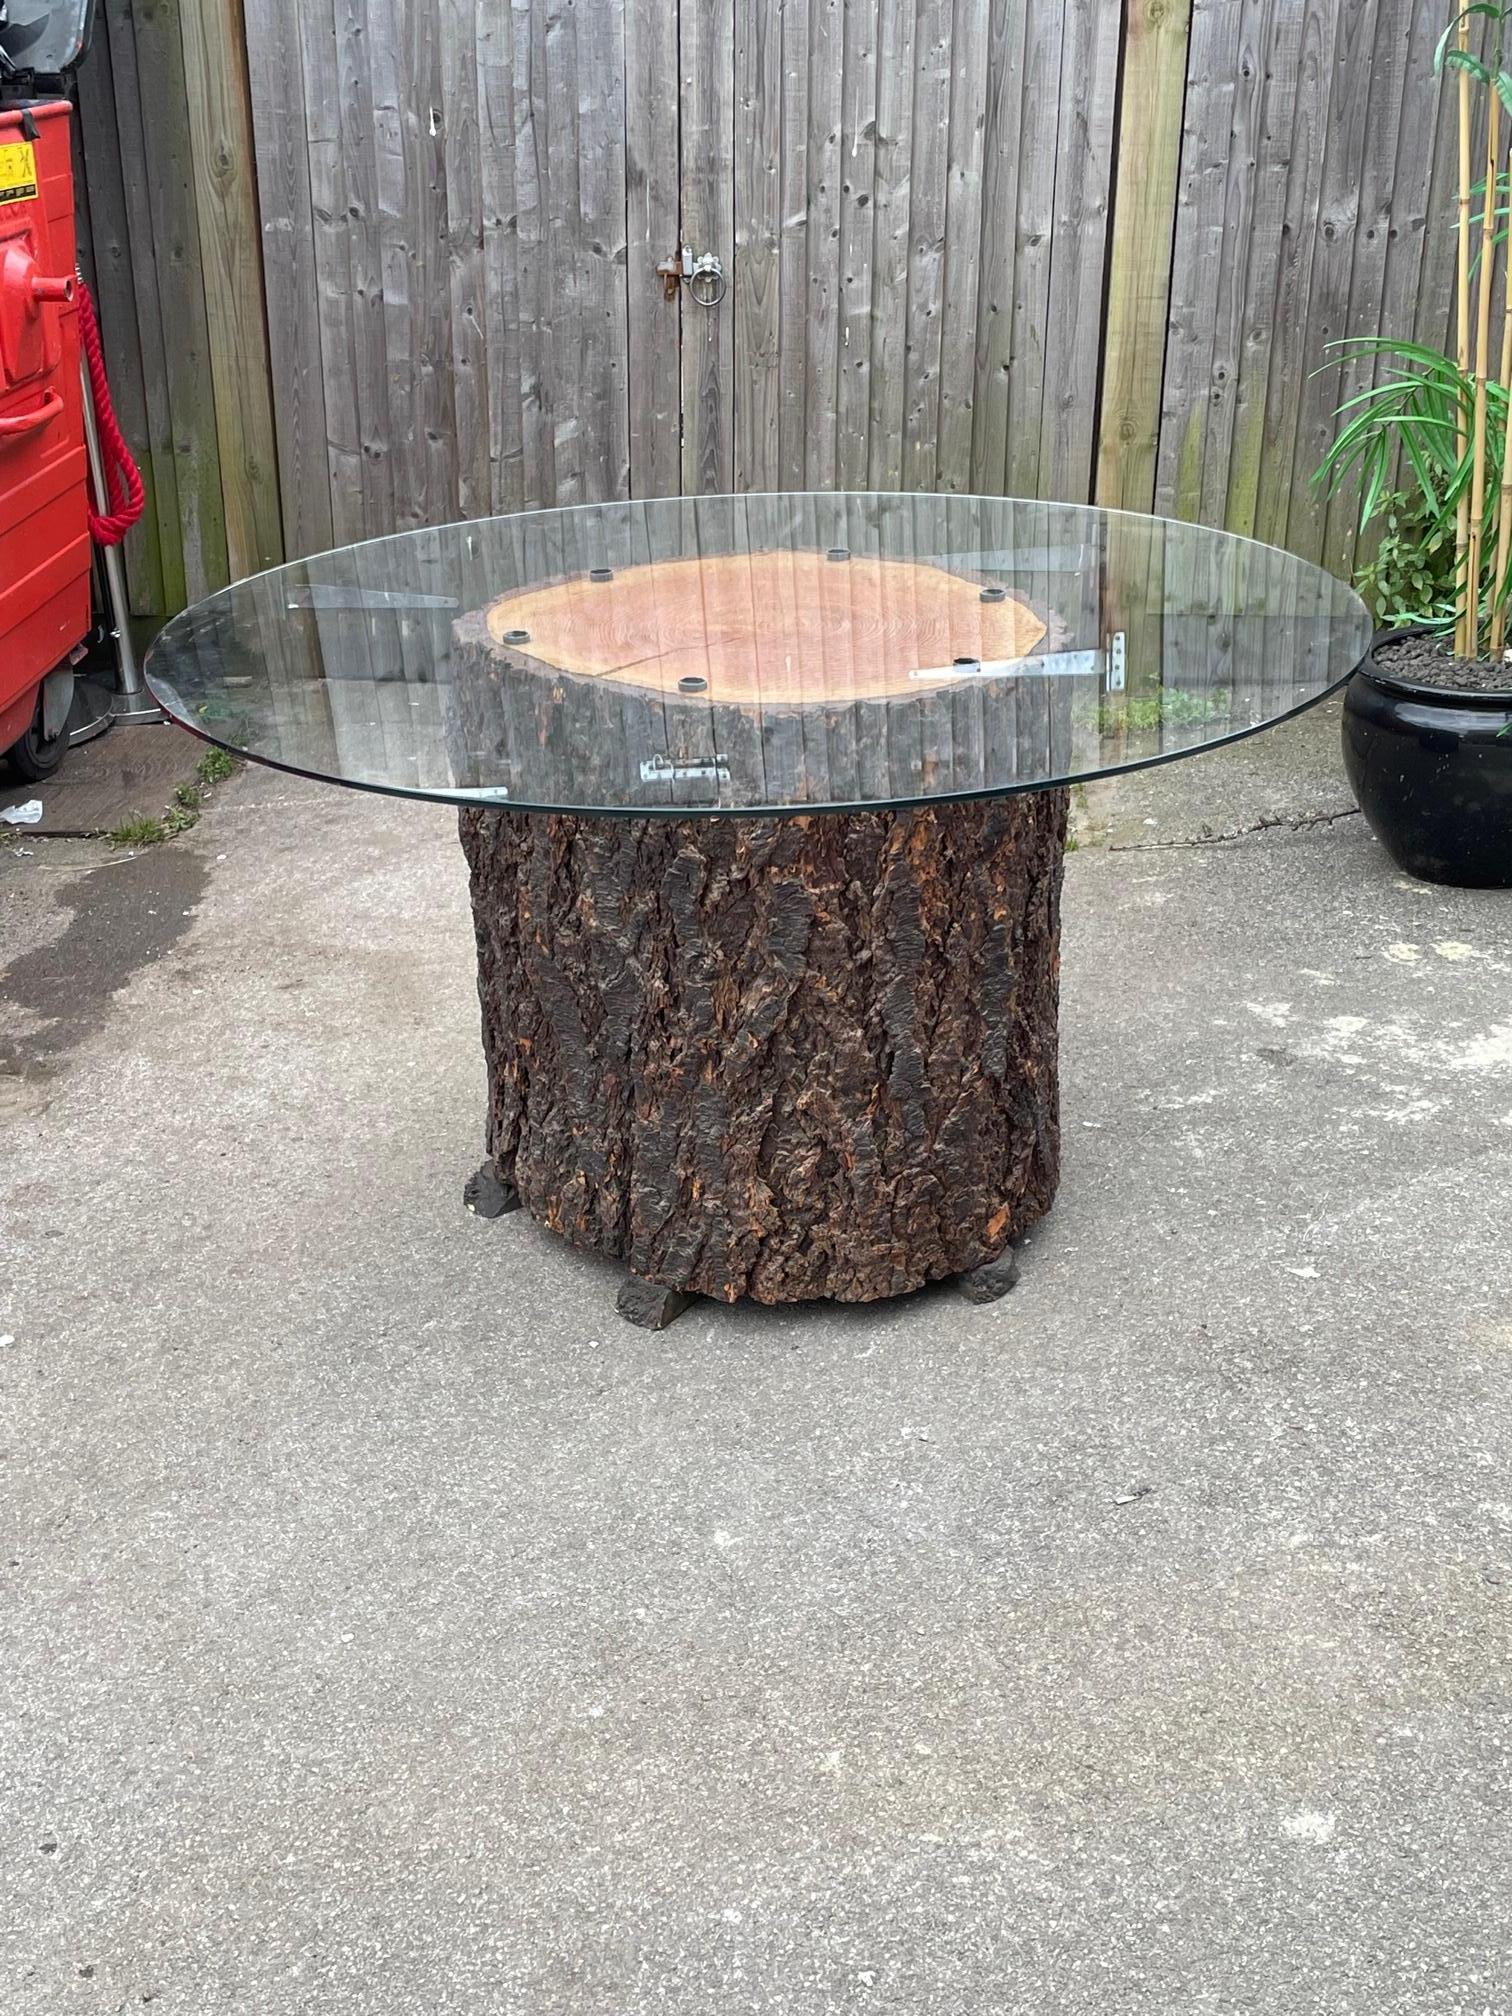 A spectacular center table made using a Douglas Fern trunk, 46 thousand year old bog wood pegs which hold the large glass circular top to the base.

This table has been made by a masters craftsman who made furniture and various items for a lot of